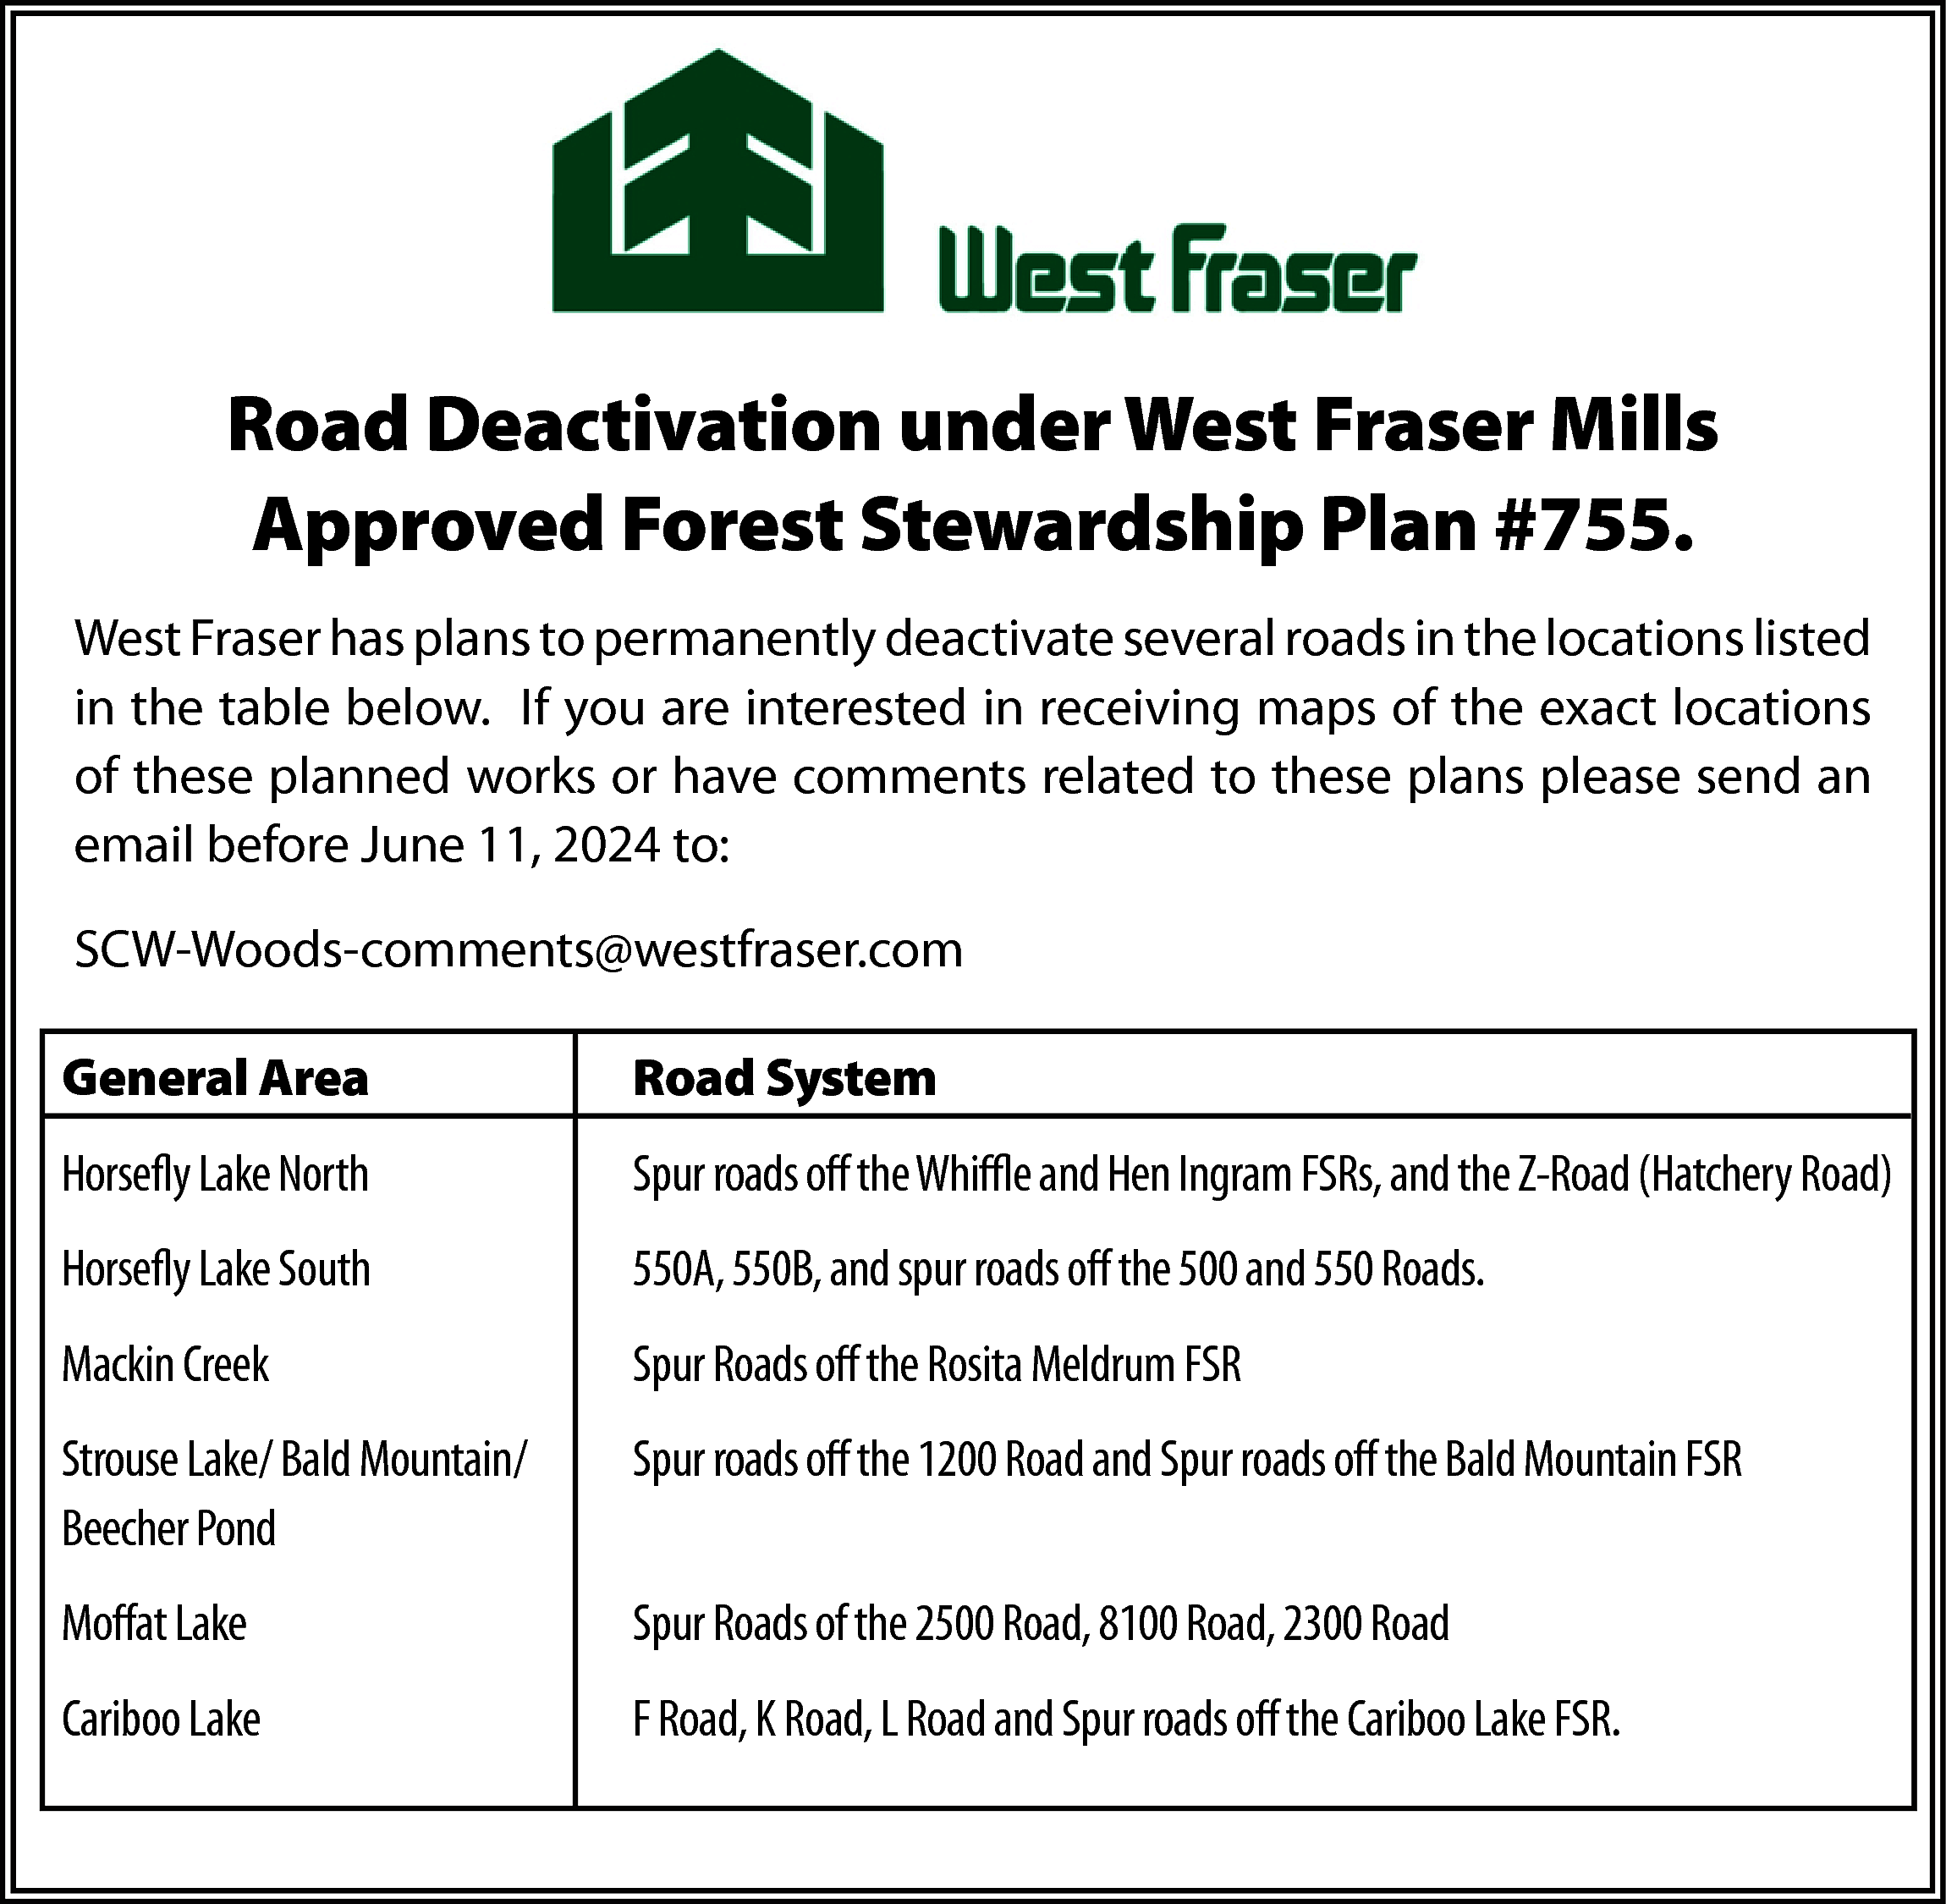 Road Deactivation under West Fraser  Road Deactivation under West Fraser Mills  Approved Forest Stewardship Plan #755.  West Fraser has plans to permanently deactivate several roads in the locations listed  in the table below. If you are interested in receiving maps of the exact locations  of these planned works or have comments related to these plans please send an  email before June 11, 2024 to:  SCW-Woods-comments@westfraser.com  General Area    Road System    Horsefly Lake North    Spur roads off the Whiffle and Hen Ingram FSRs, and the Z-Road (Hatchery Road)    Horsefly Lake South    550A, 550B, and spur roads off the 500 and 550 Roads.    Mackin Creek    Spur Roads off the Rosita Meldrum FSR    Strouse Lake/ Bald Mountain/  Beecher Pond    Spur roads off the 1200 Road and Spur roads off the Bald Mountain FSR    Moffat Lake    Spur Roads of the 2500 Road, 8100 Road, 2300 Road    Cariboo Lake    F Road, K Road, L Road and Spur roads off the Cariboo Lake FSR.    